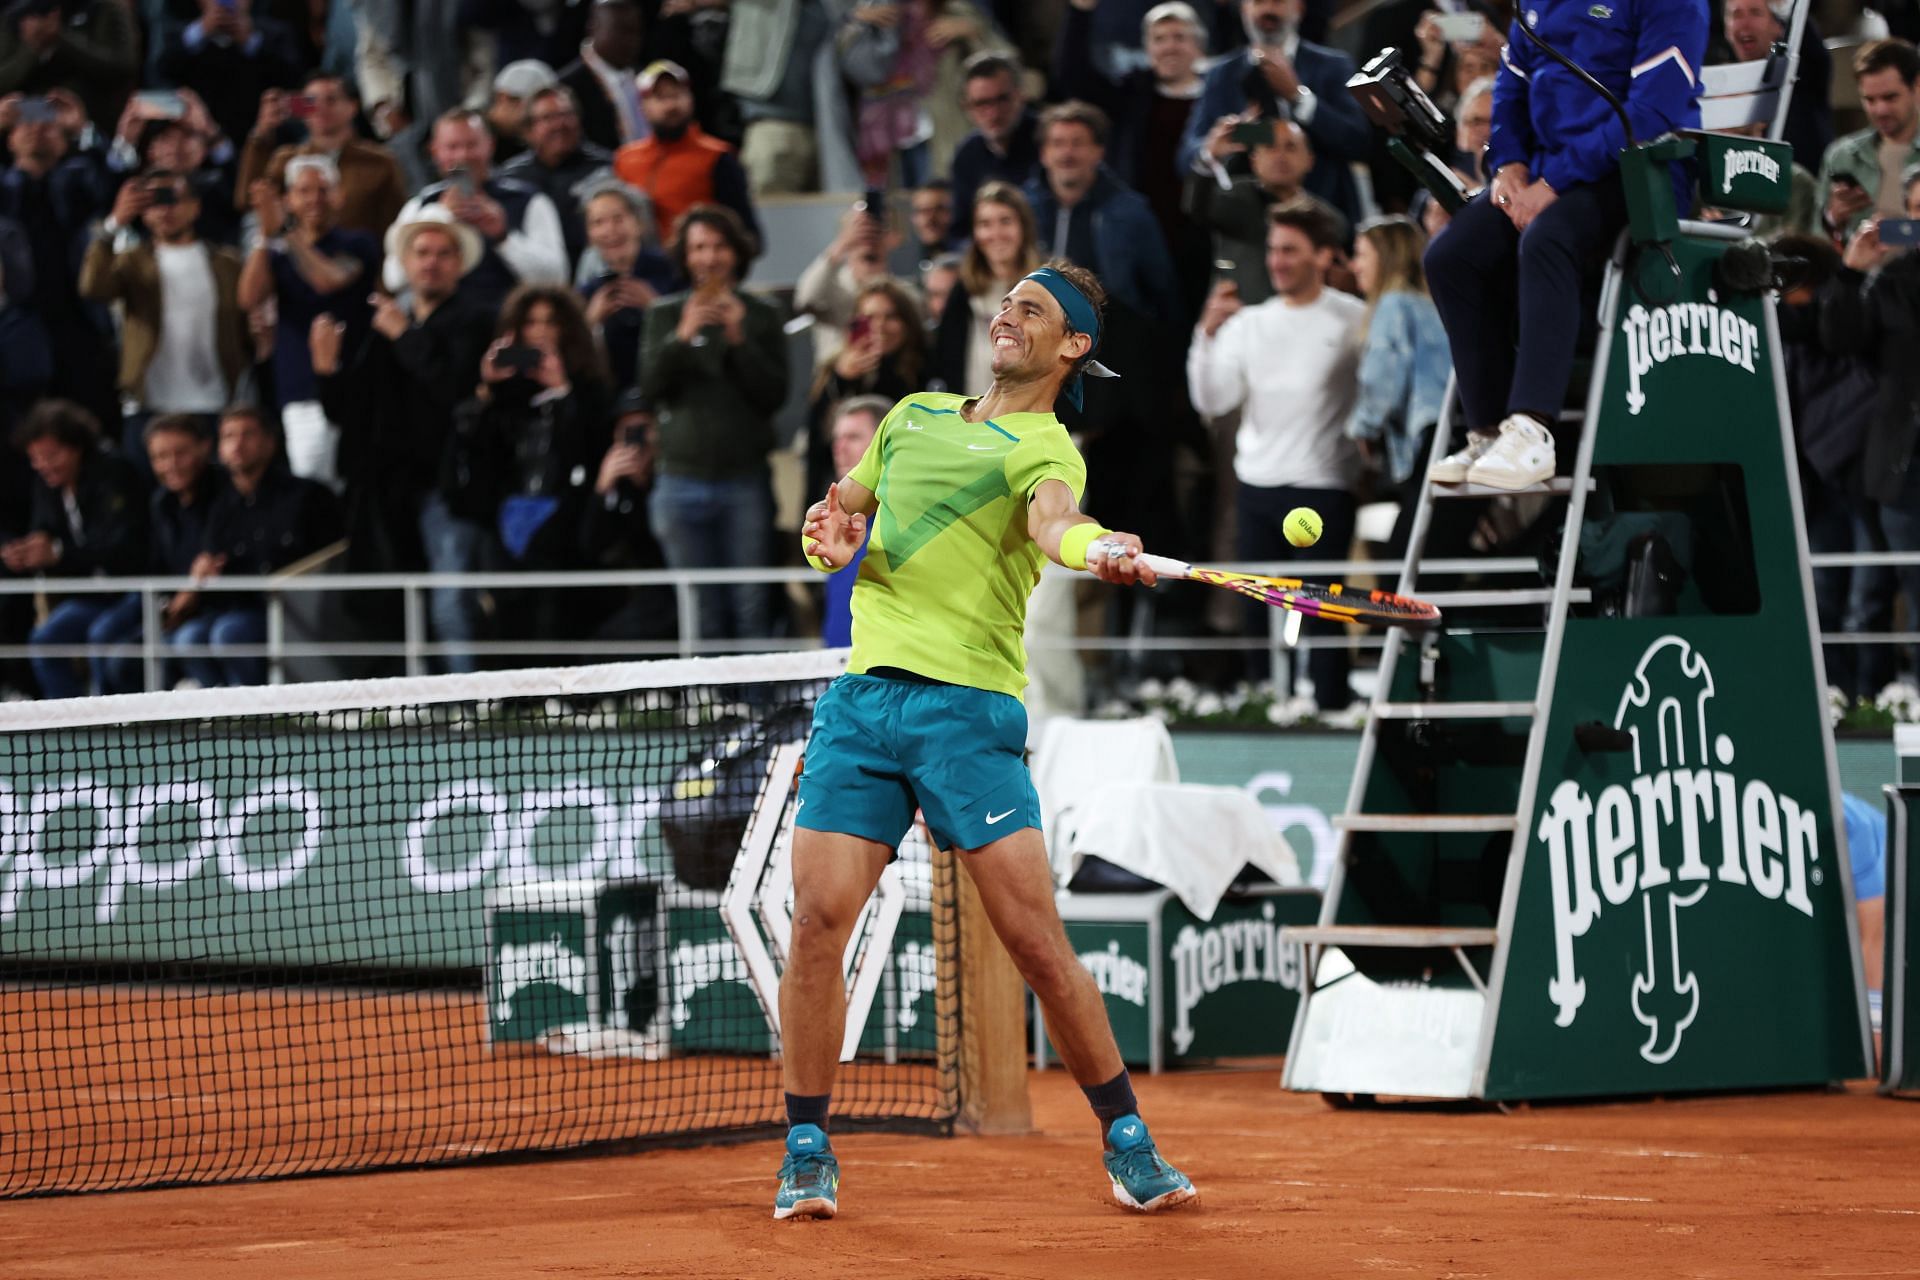 Rafael Nadal celebrates victory against Novak Djokovic in the quarterfinals of the French Open